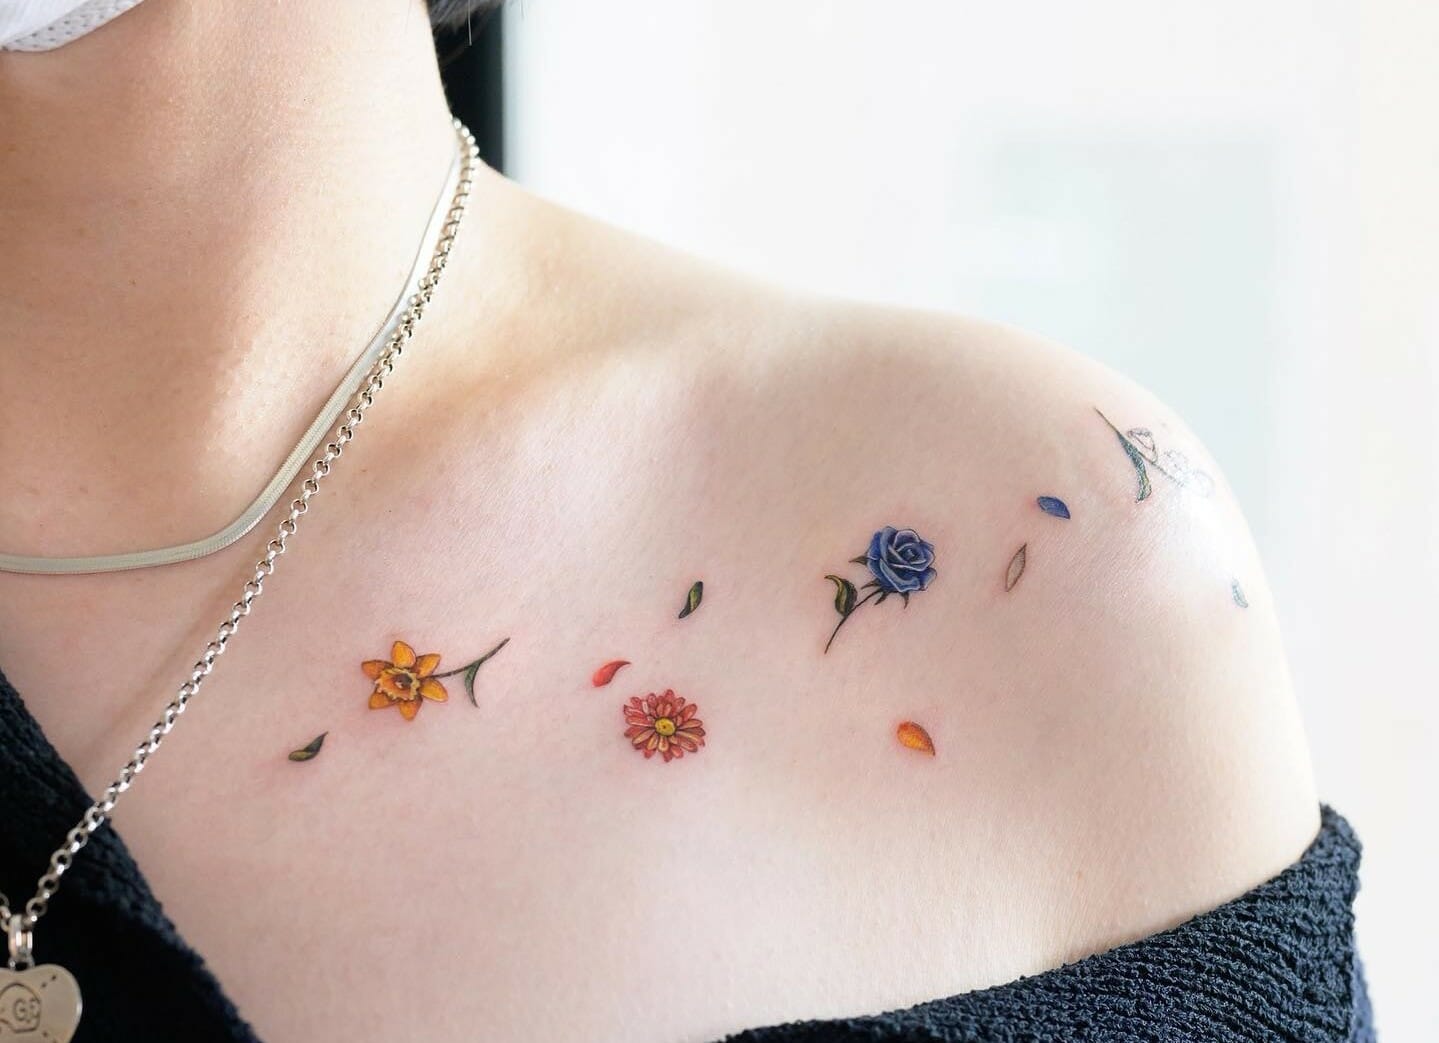 15+ Cute Shoulder Tattoo Ideas That Will Blow Your Mind! - alexie